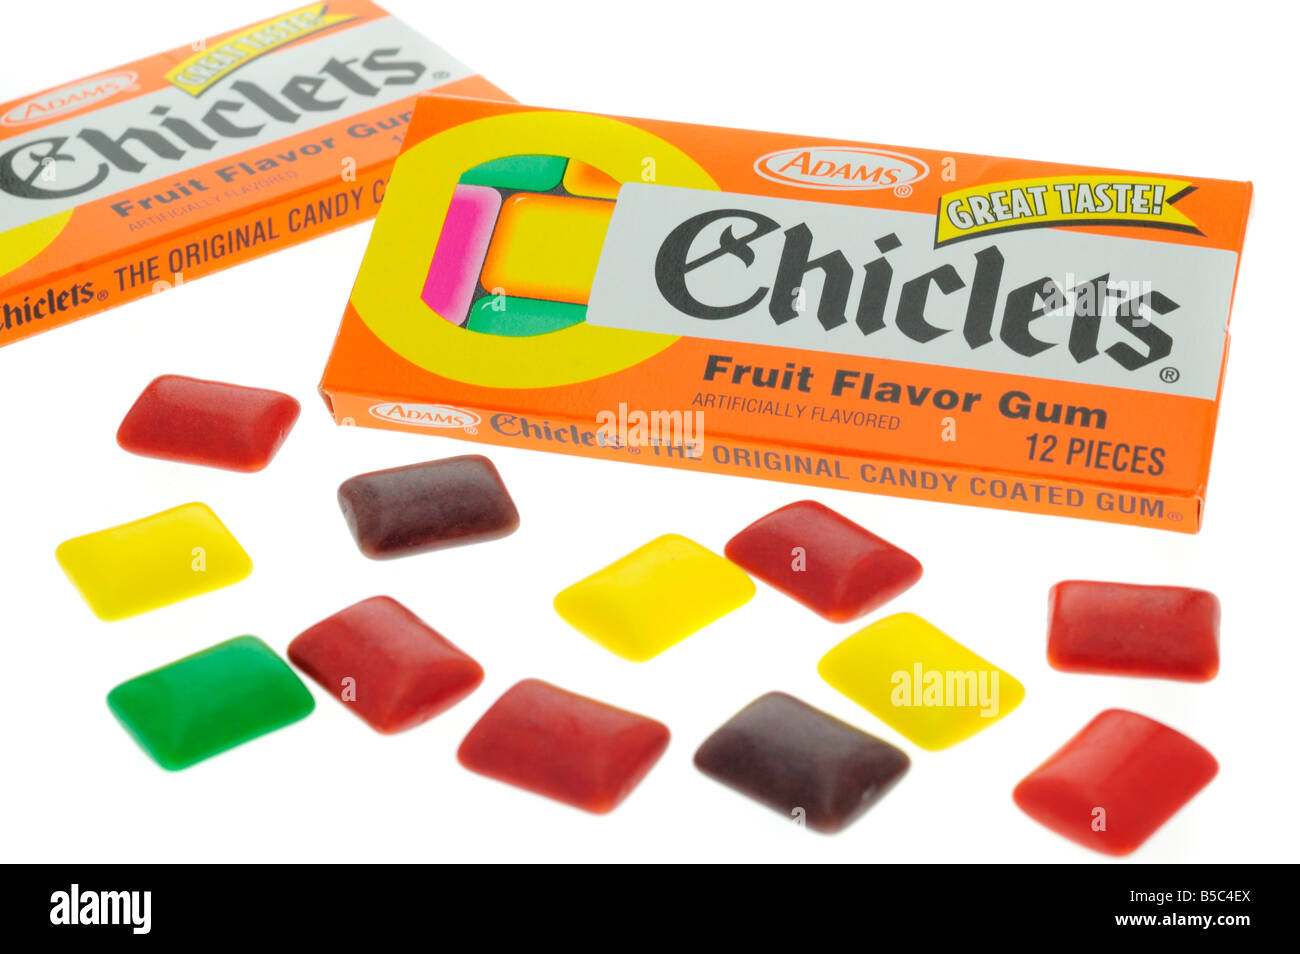 Adams Chiclets Fruit Flavoured Chewing Gum Stock Photo